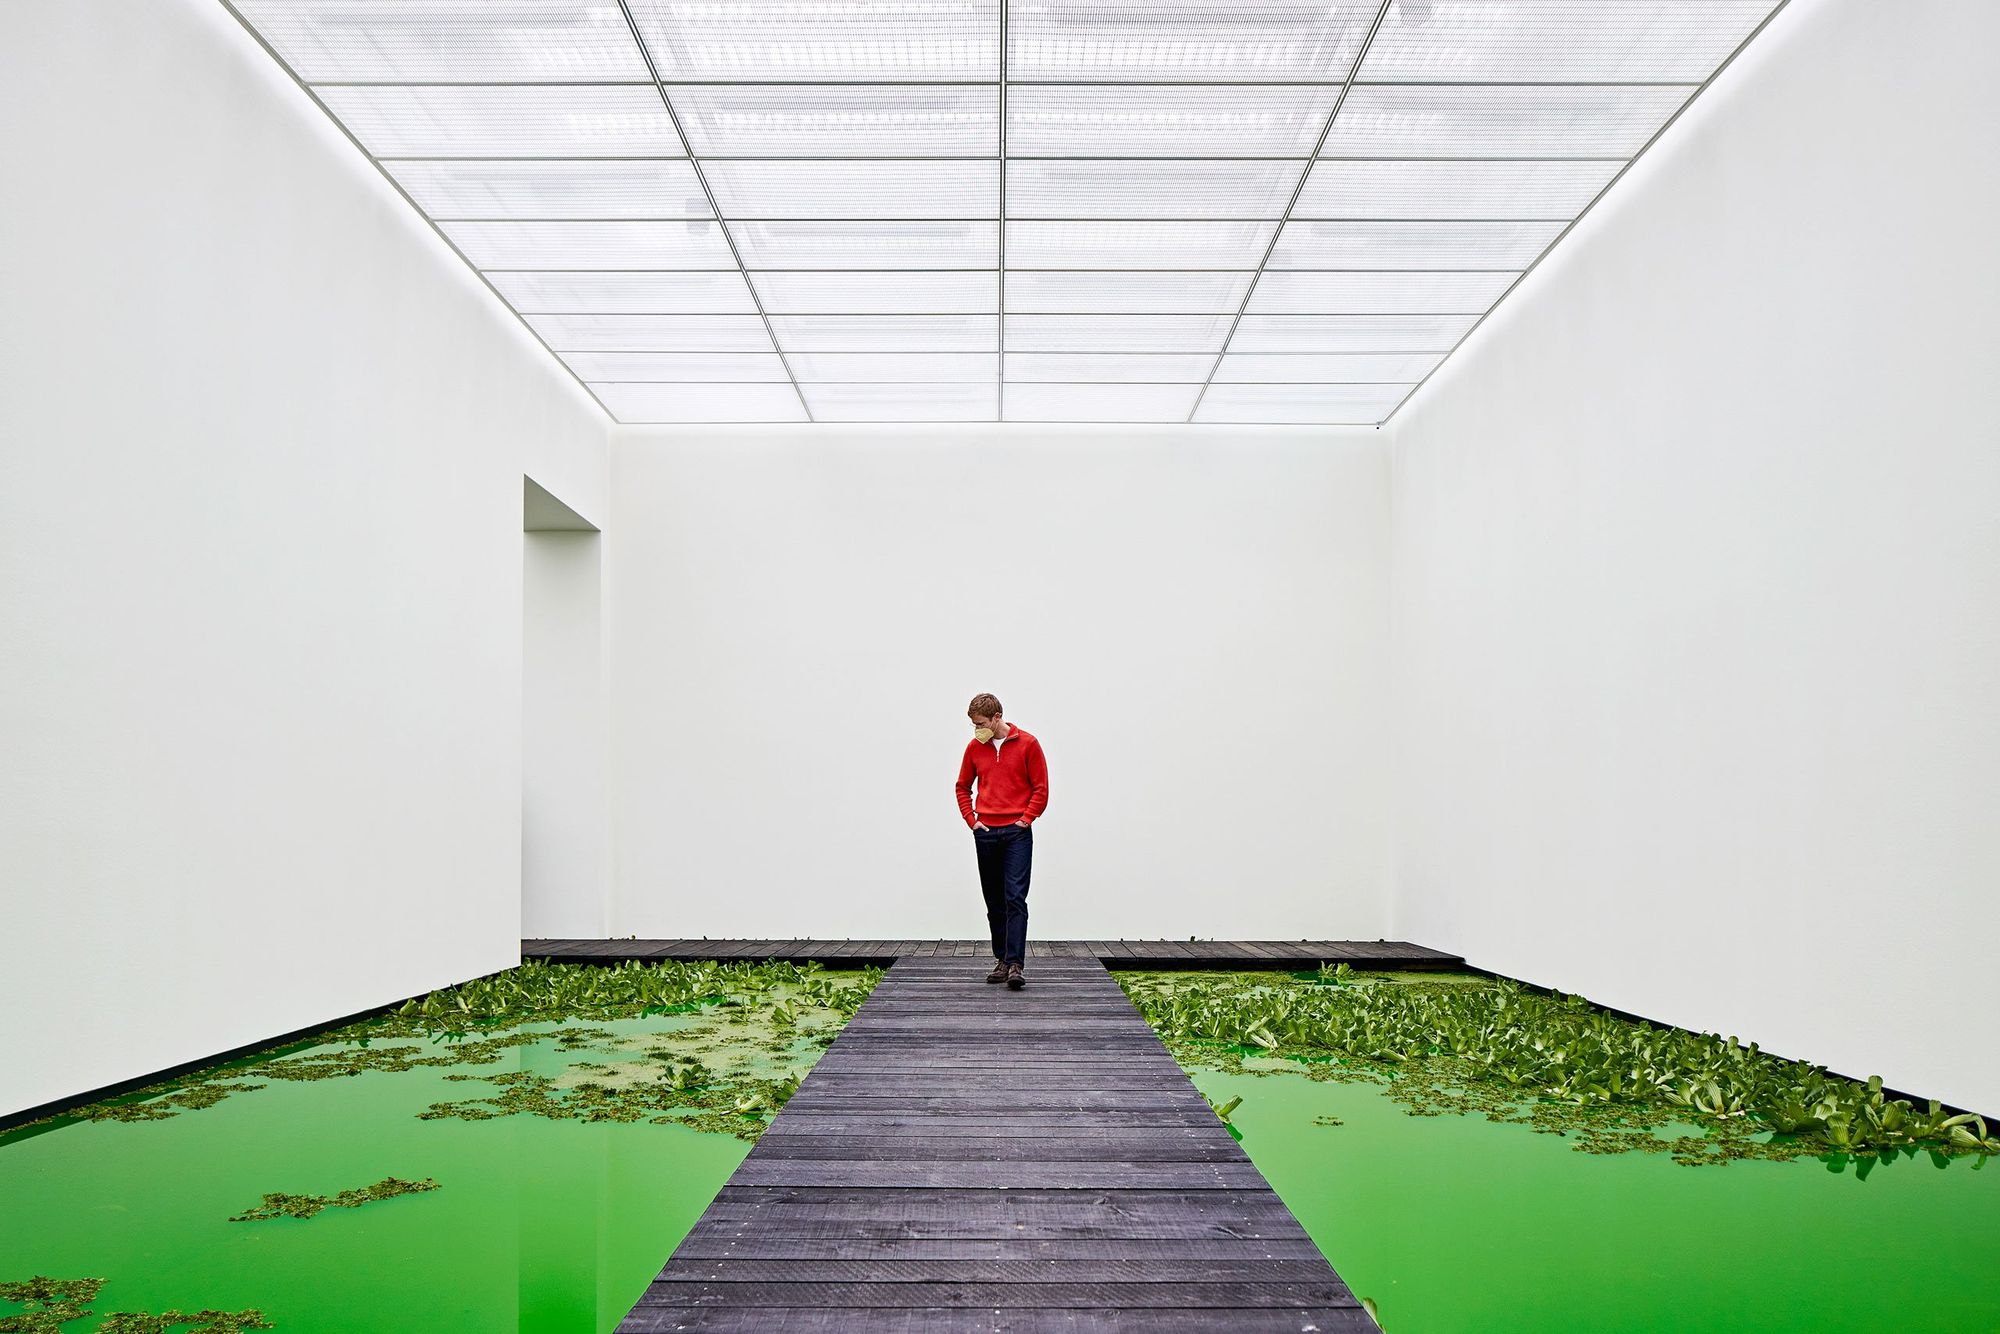 Nature took over in the Swiss exhibition space | Ólafur Elíasson